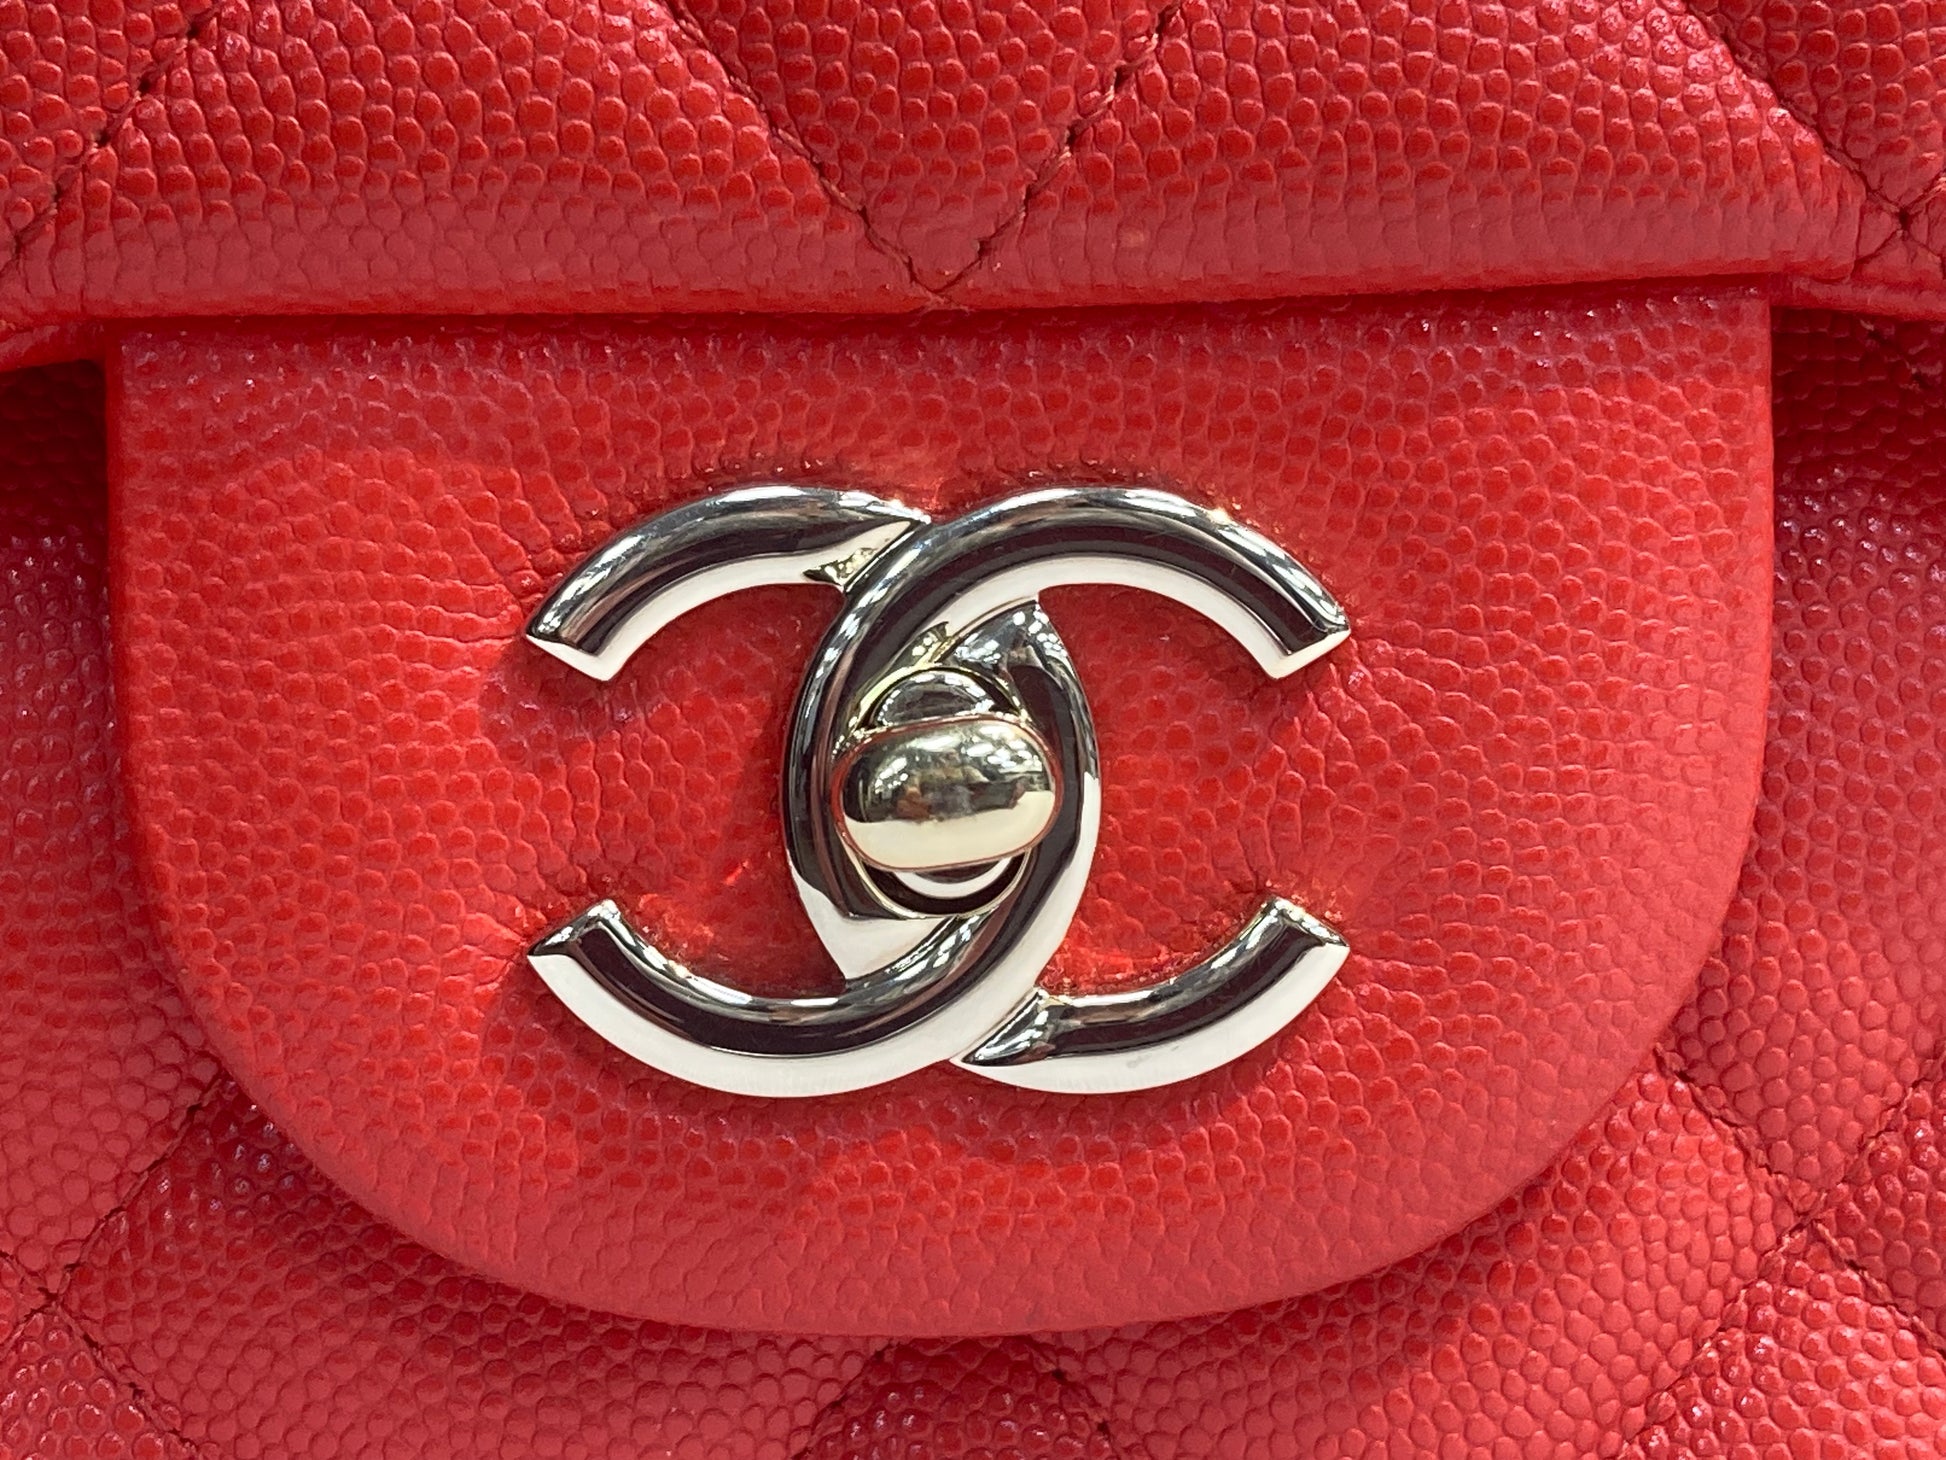 Chanel Caviar Quilted Mini Rectangular Flap Red